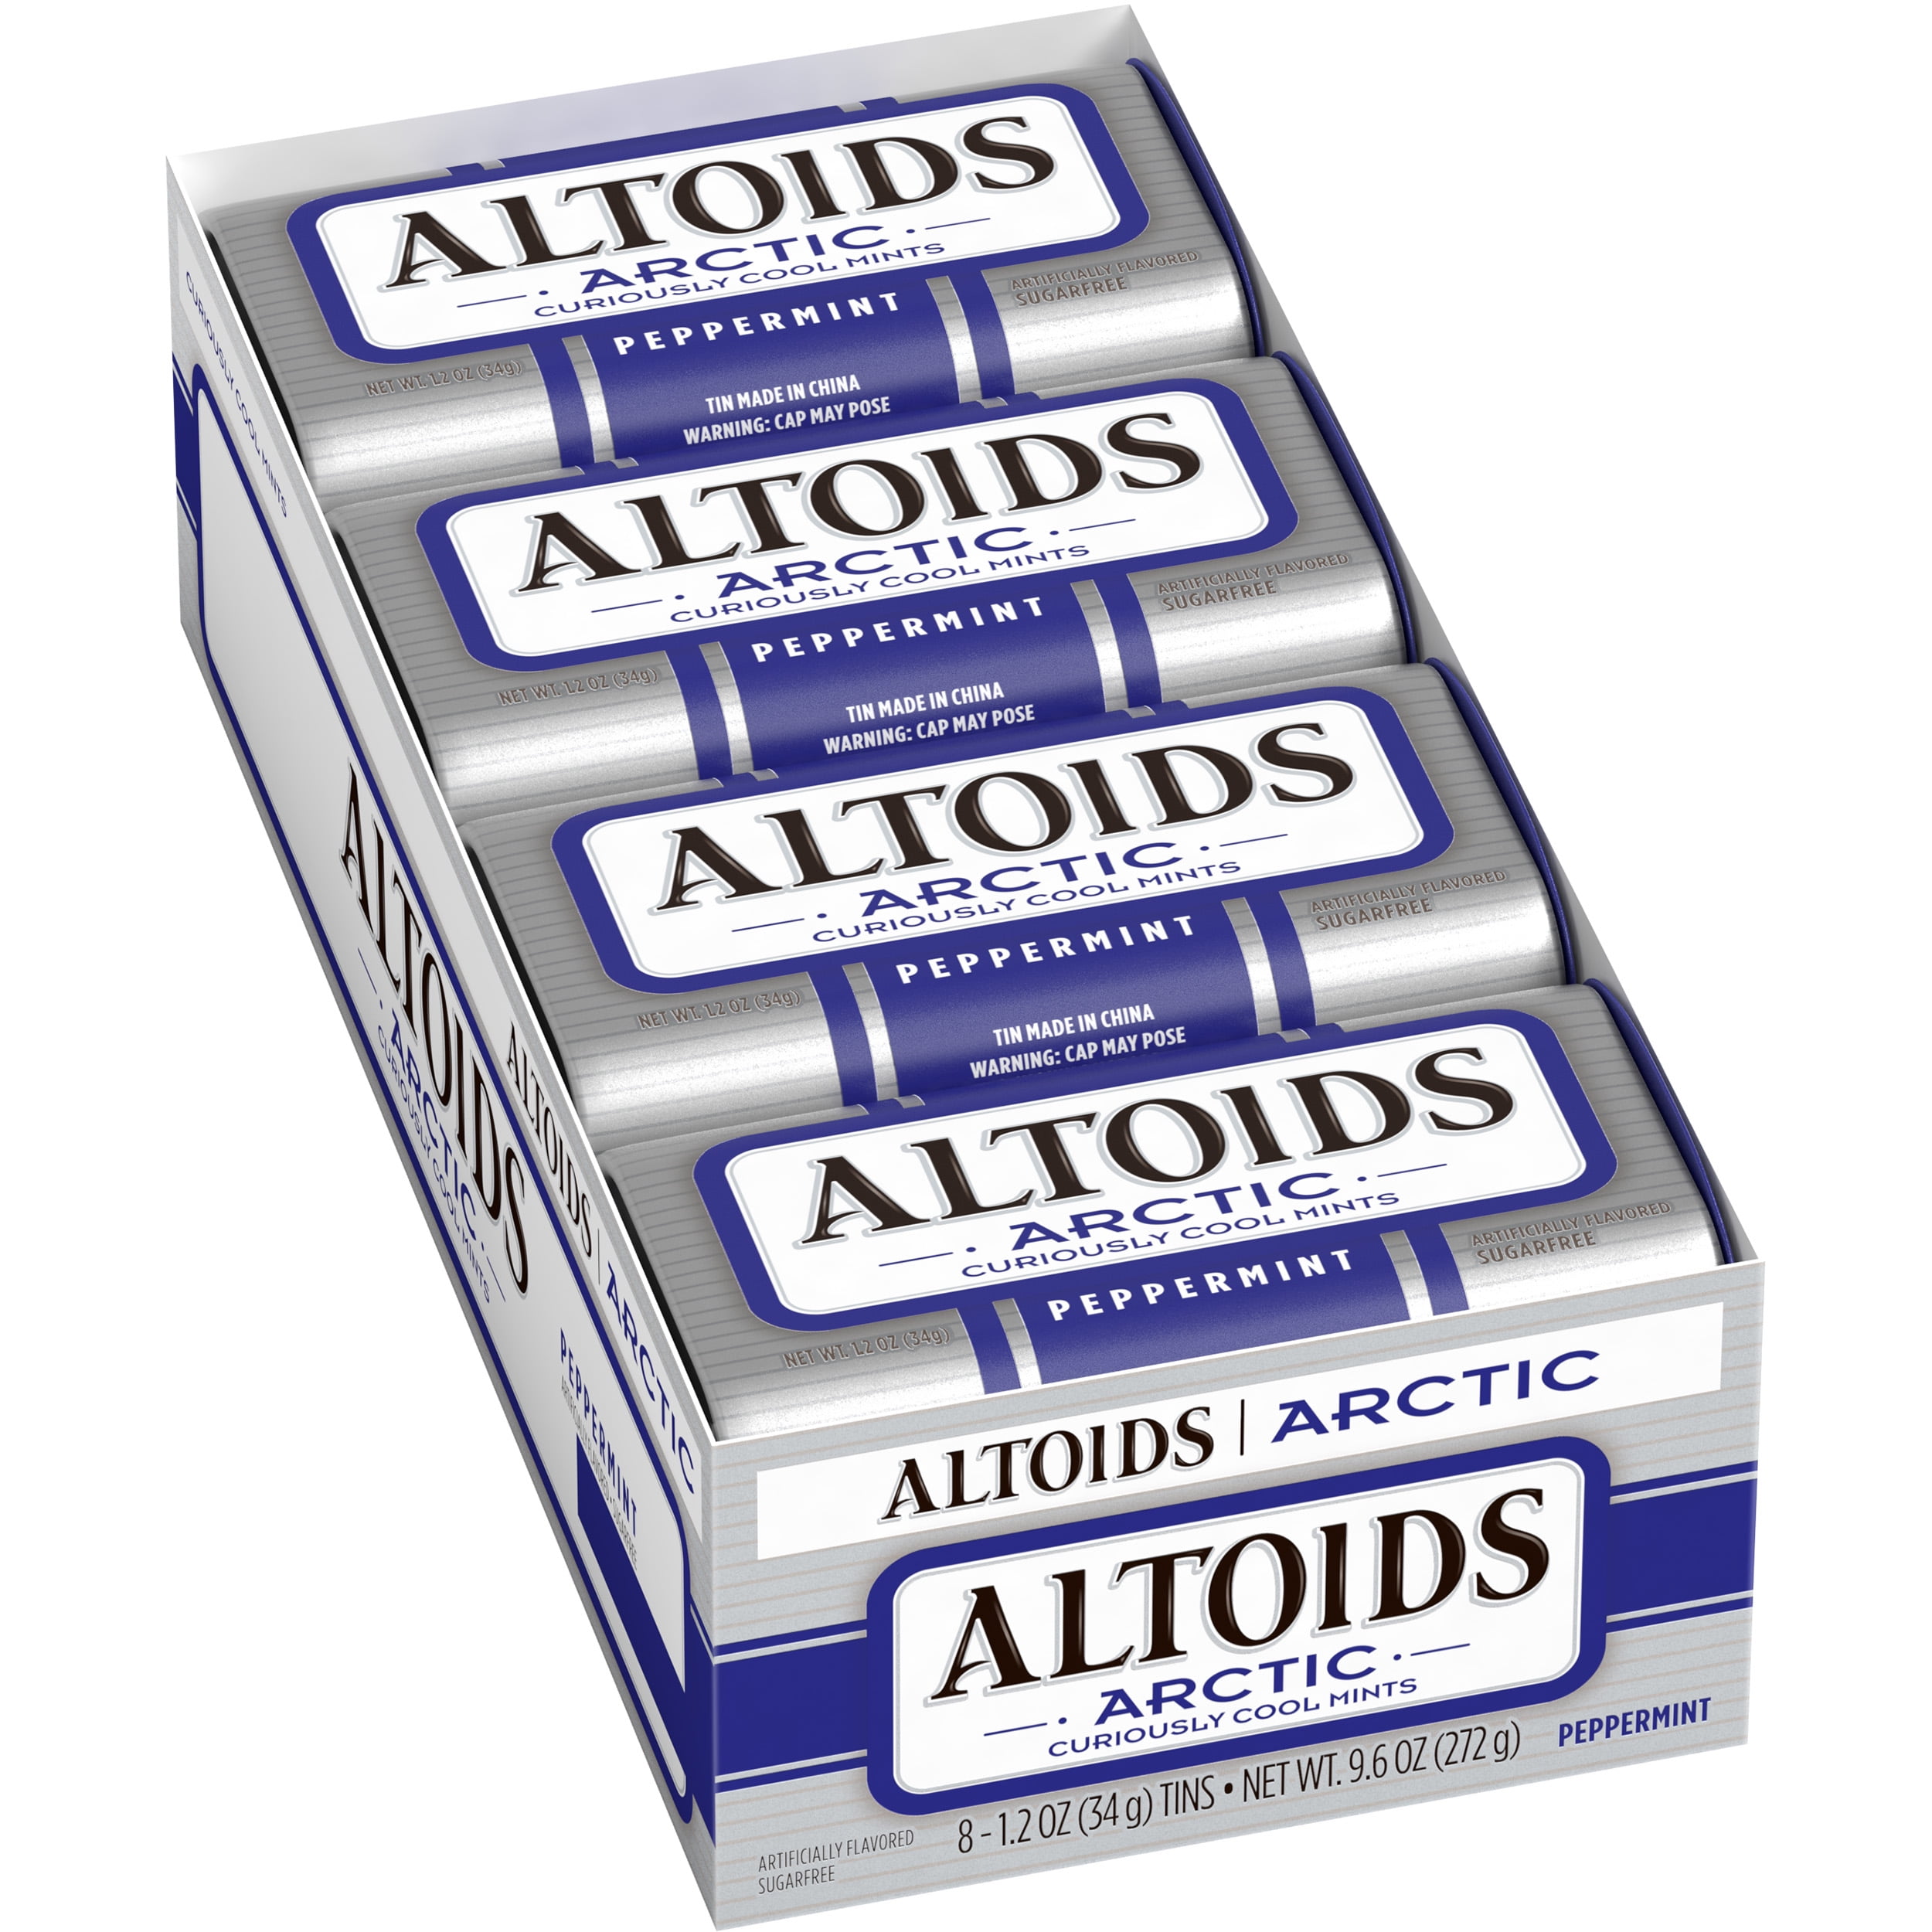 Altoids Curiously Strong Mints Sugar Free Peppermint 0.33 Oz Pack